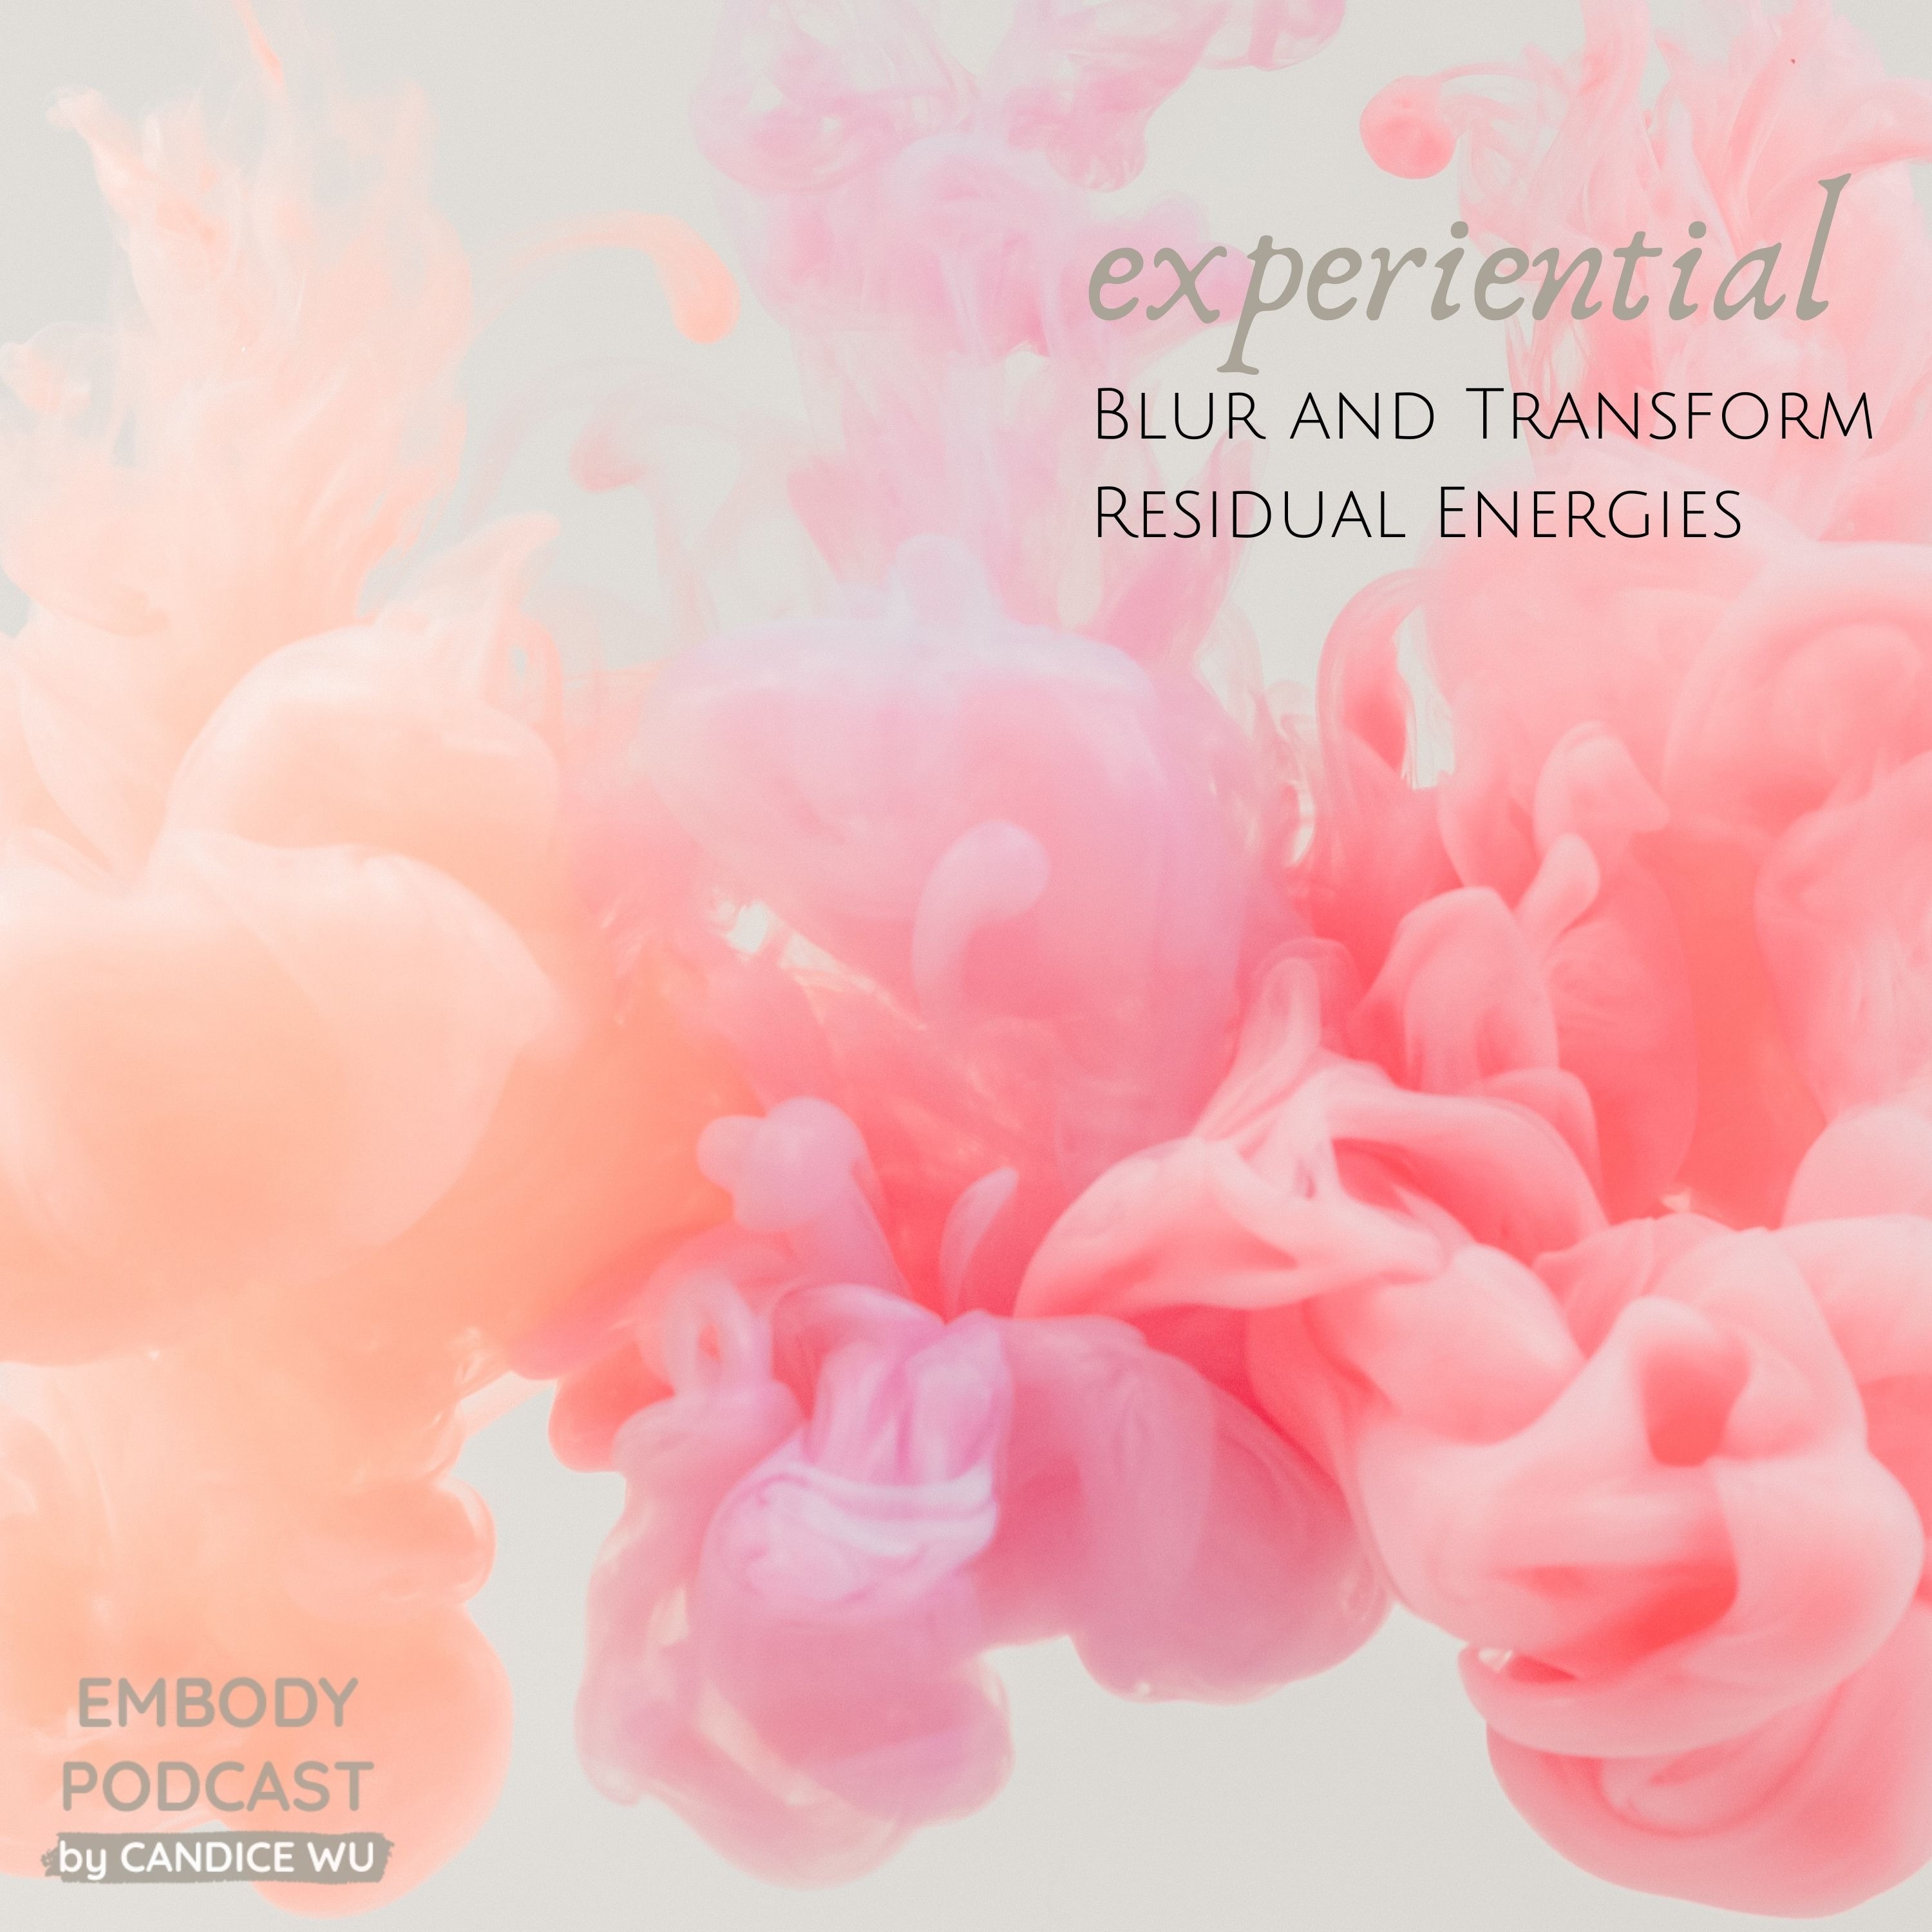 162: Experiential: Blur and Transform Residual Energies